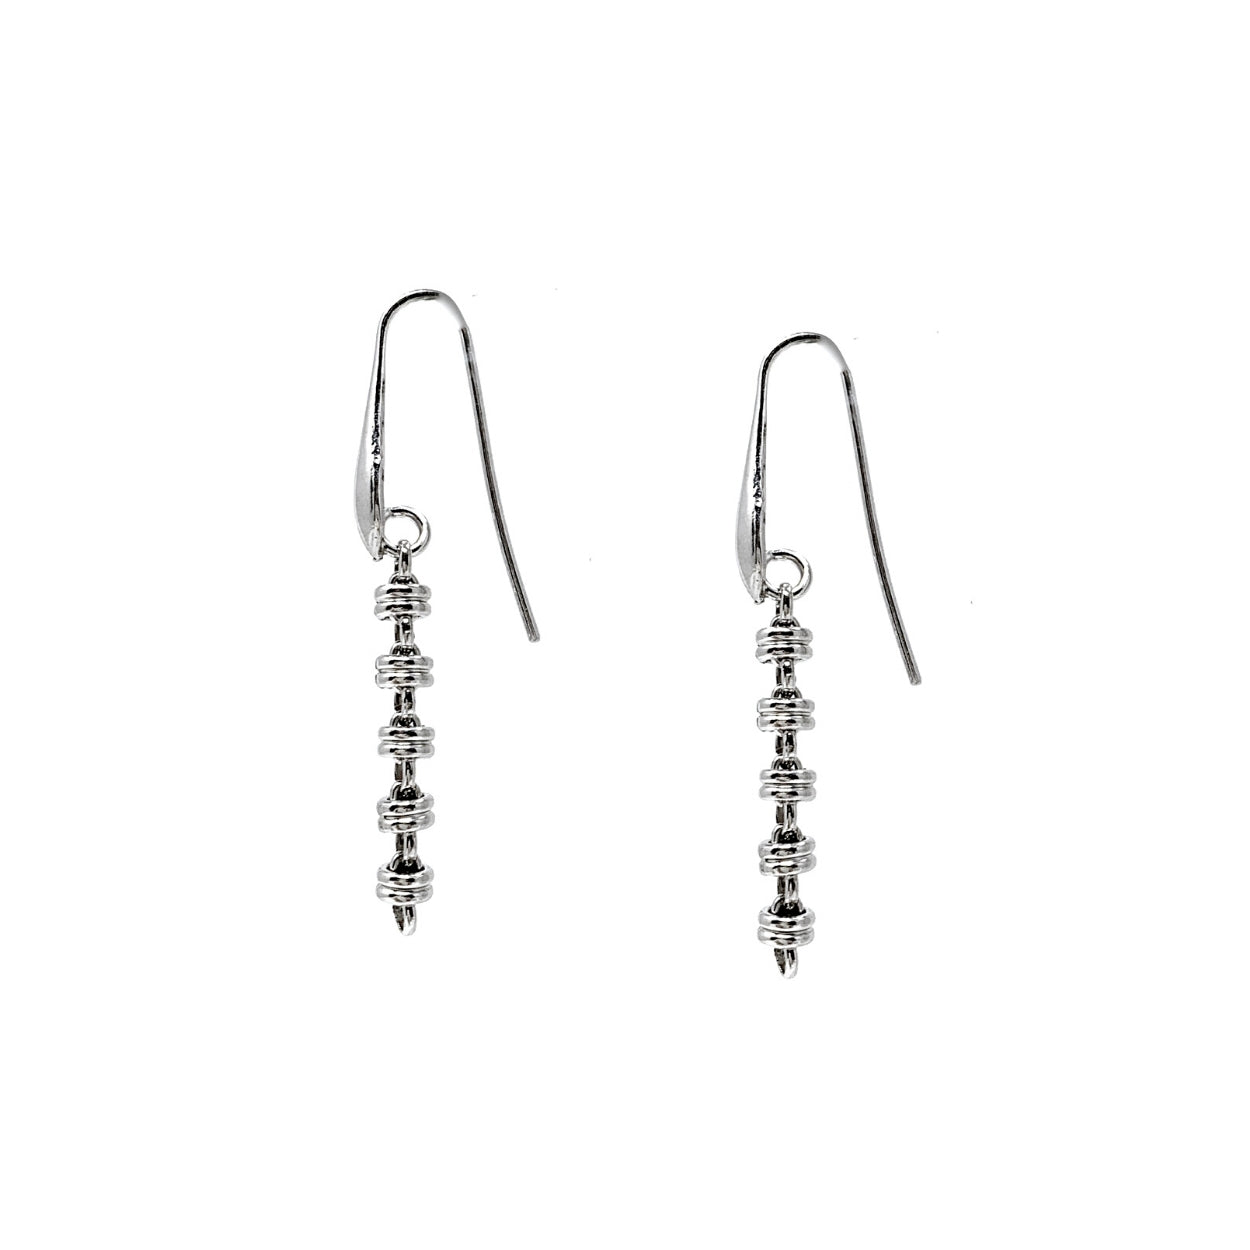 A side view of long silver chain earrings designed and hand-crafted by DelBrenna Italian Jewelers in Tuscany. The earrings are designed based on the iconic Links collection of DelBrenna silver chains, necklaces, rings, and bracelets. 